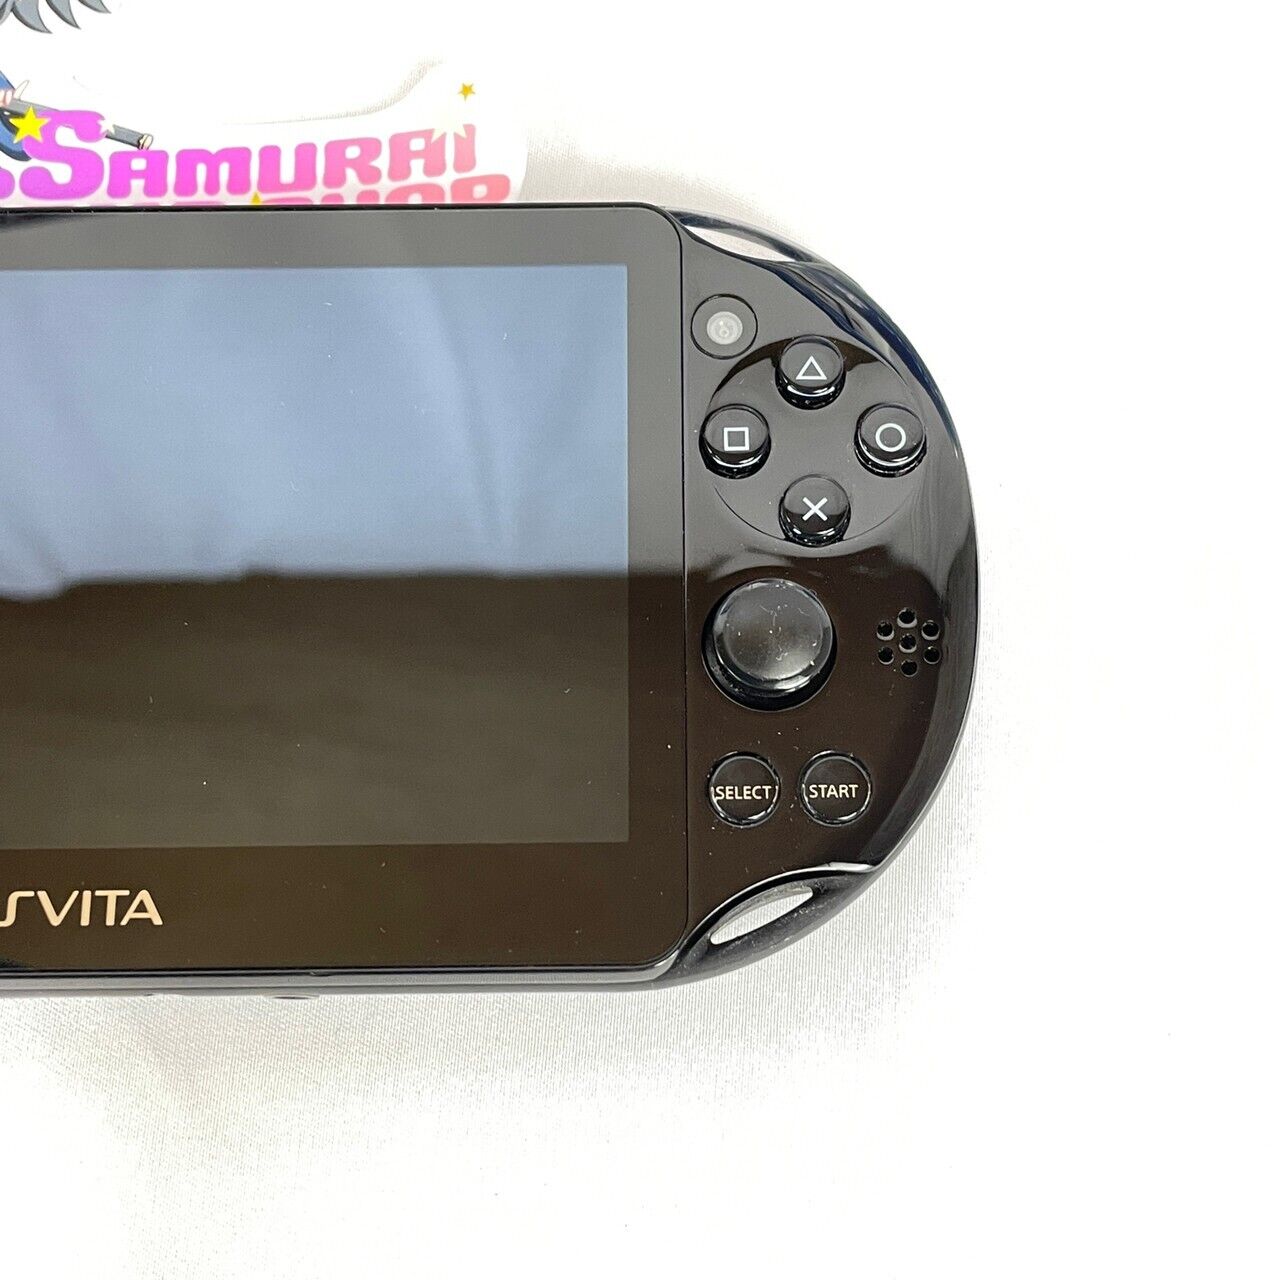 PS Vita PCH-1000 Sony Playstation Console only Used (Excellent)